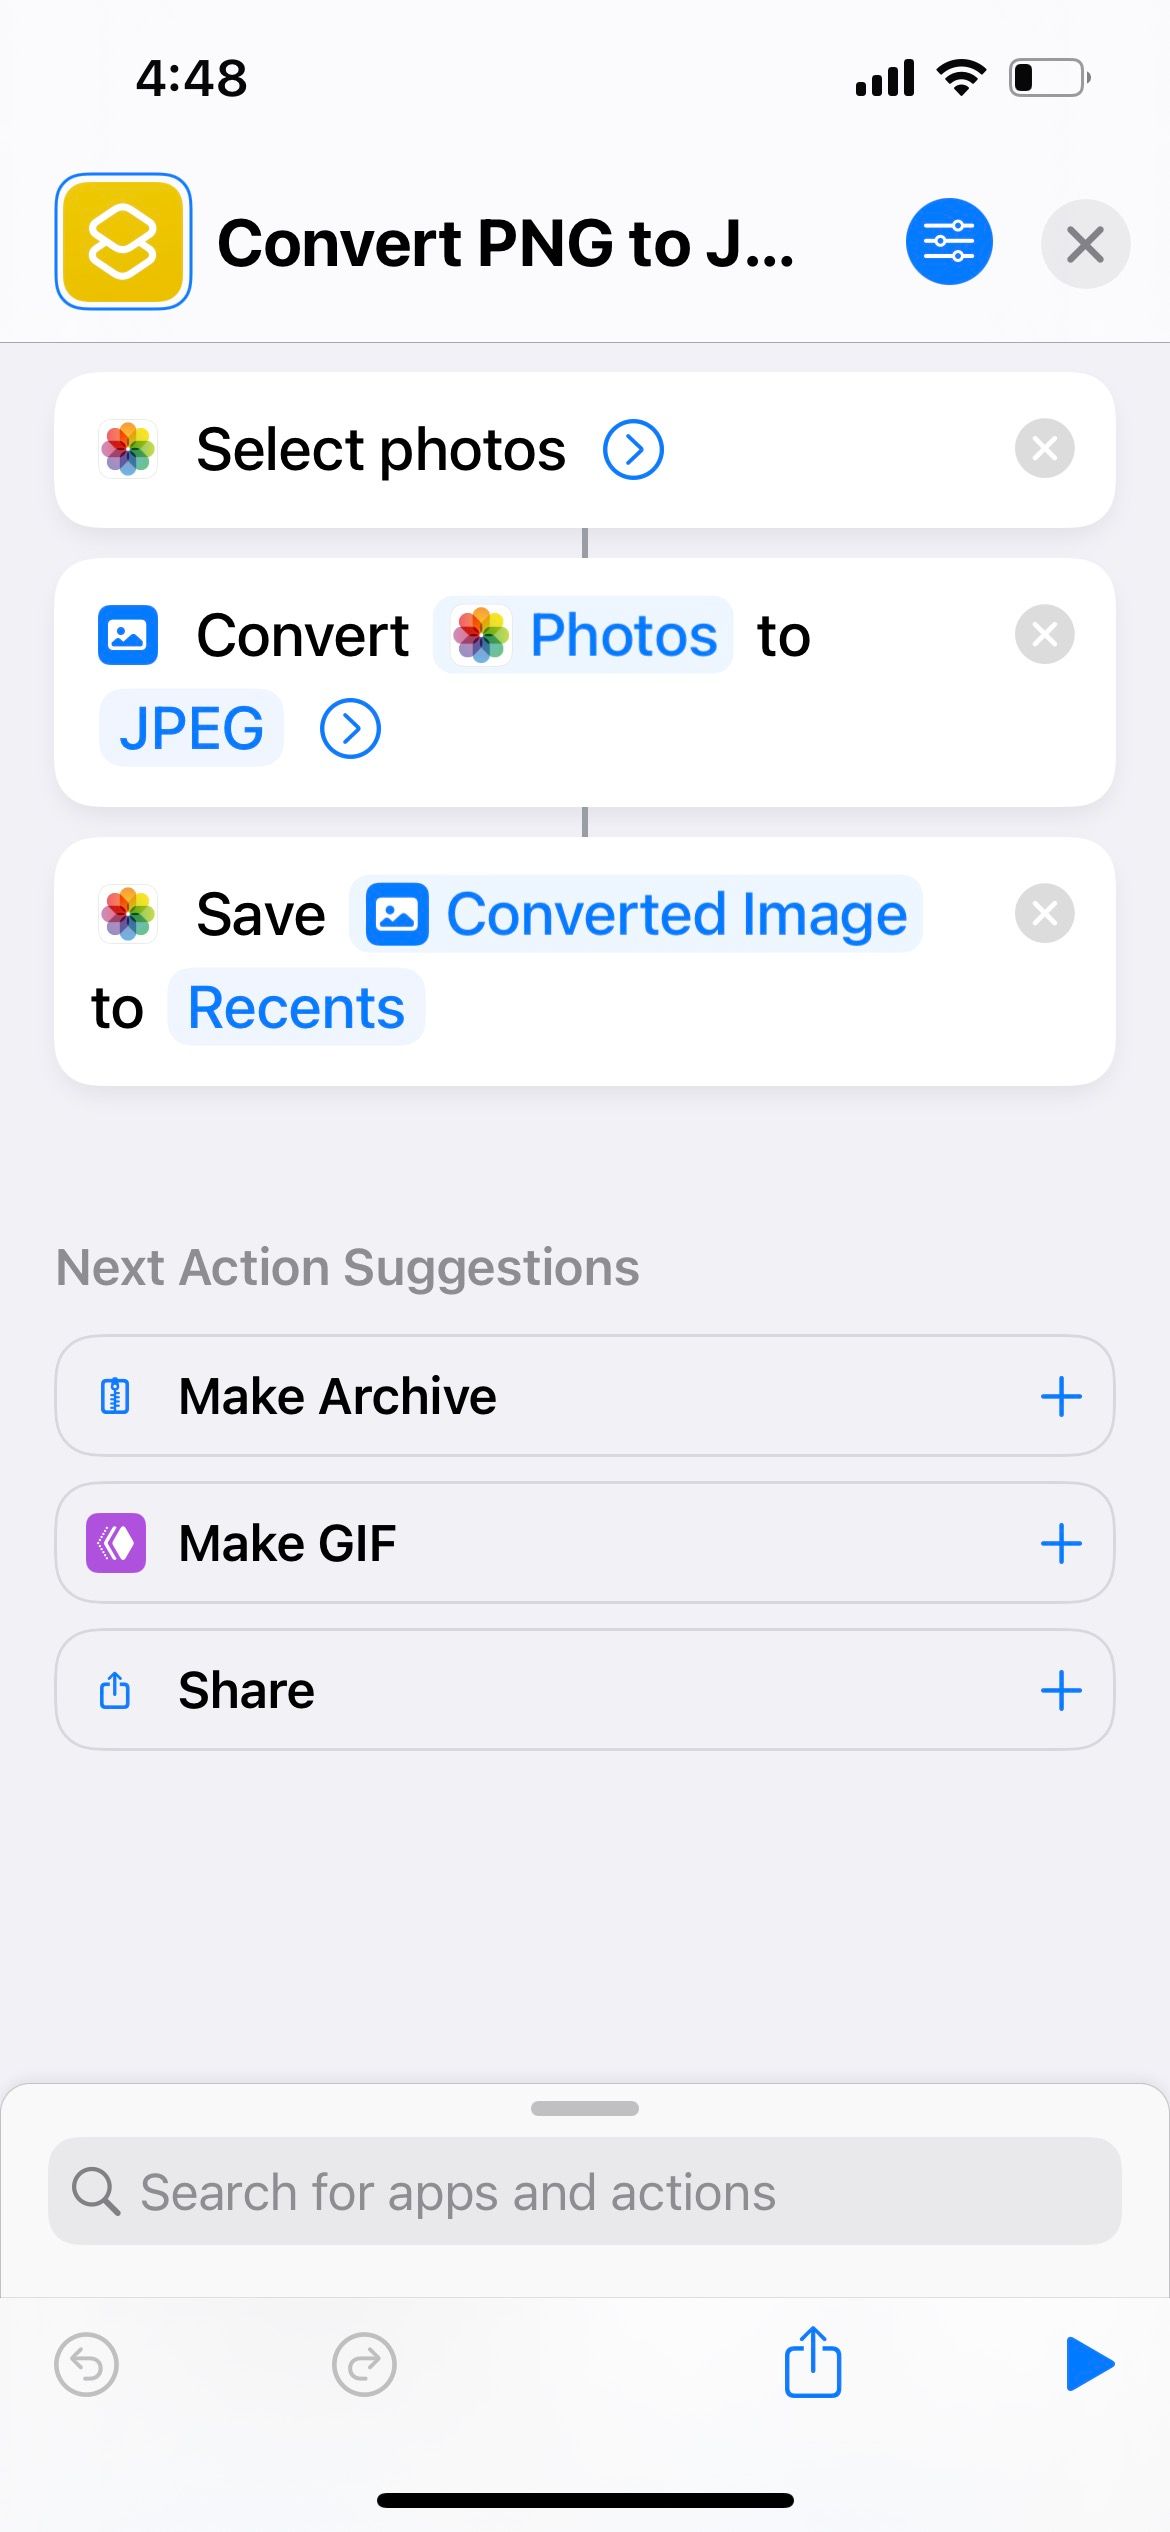 convert png to jpeg and save to recents album iphone shortcut 